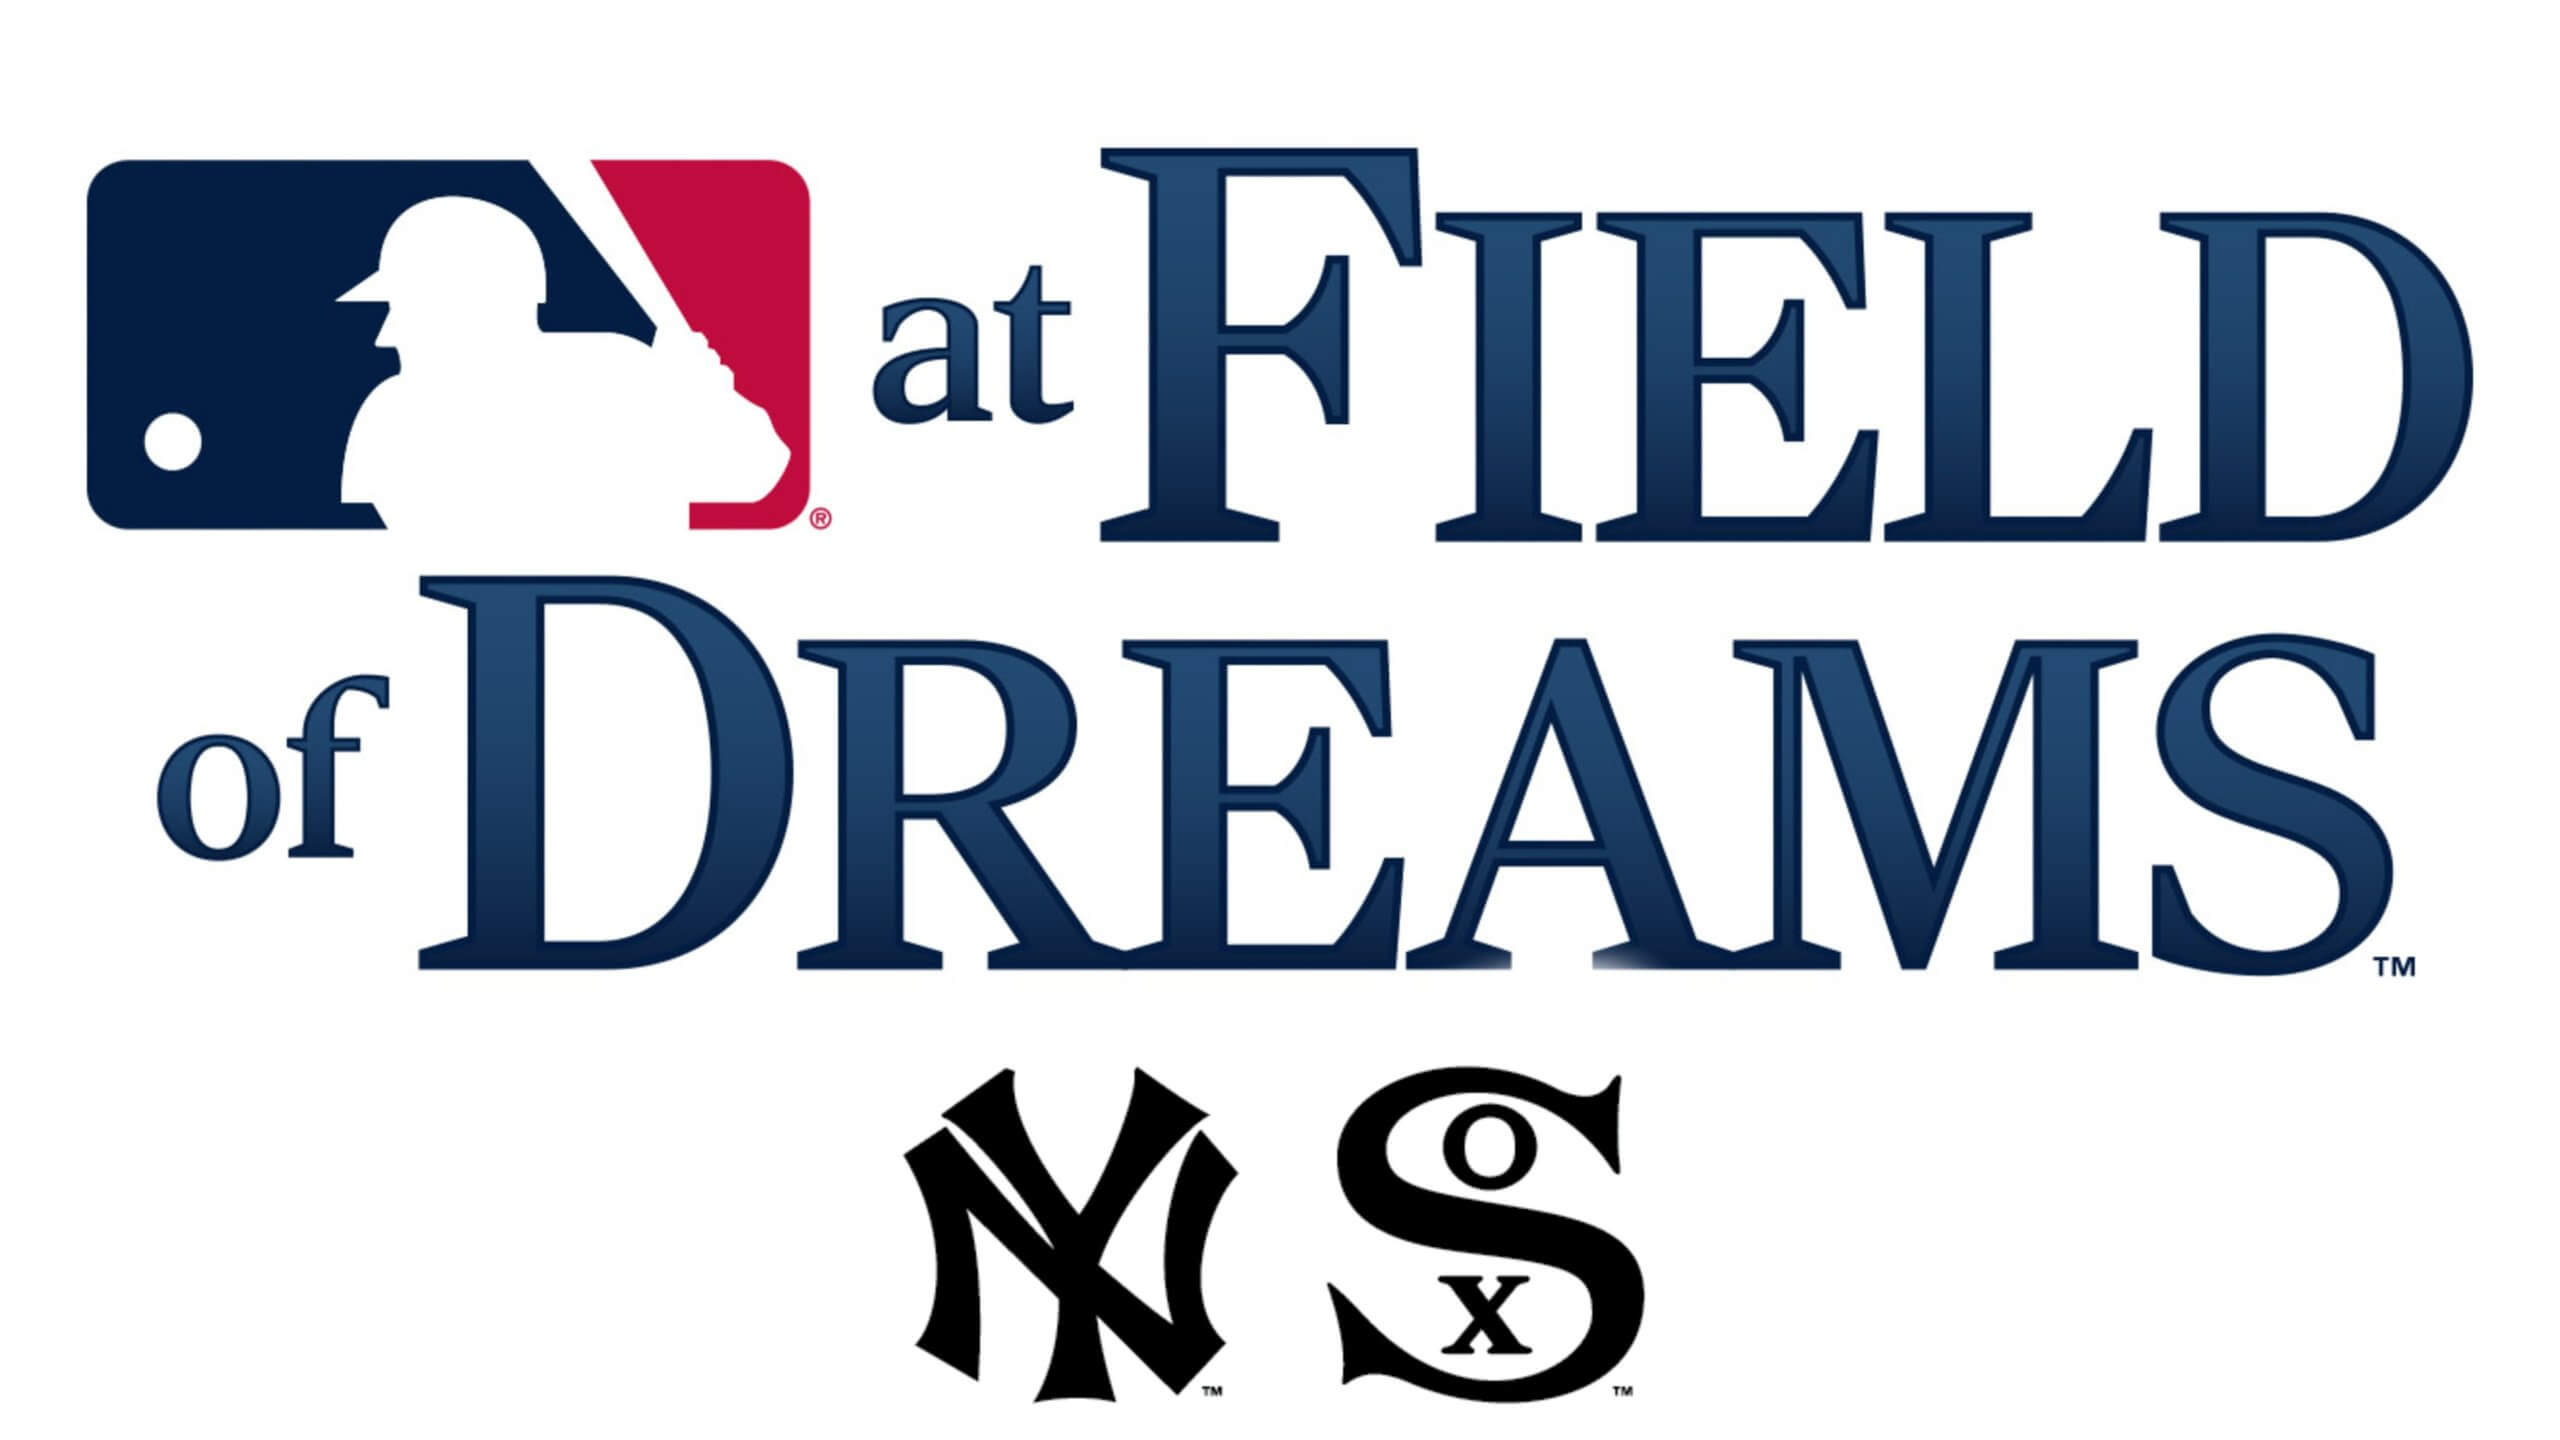 White Sox, Yankees in awe at Field of Dreams; MLB promises repeat